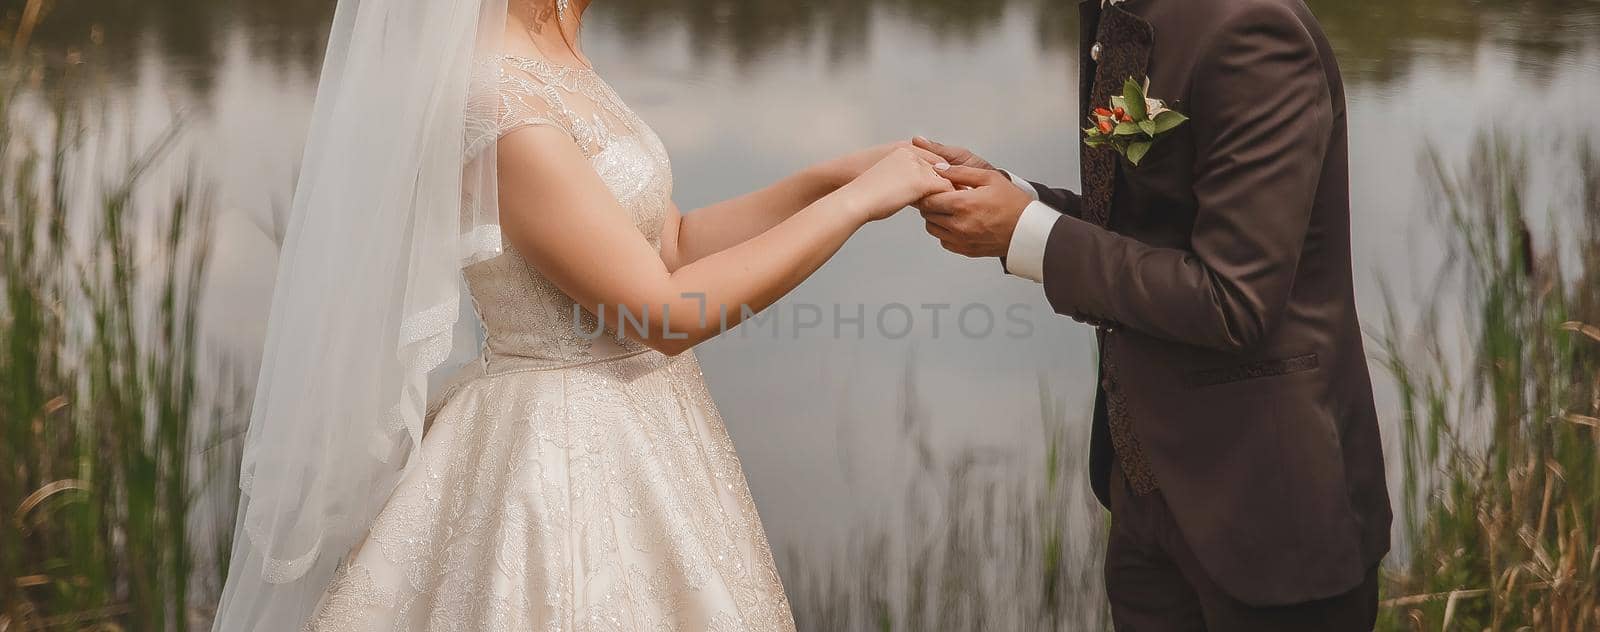 Wedding. The bride in the wedding dress stands opposite the groom in a brown suit and holds hands outdoors by AYDO8